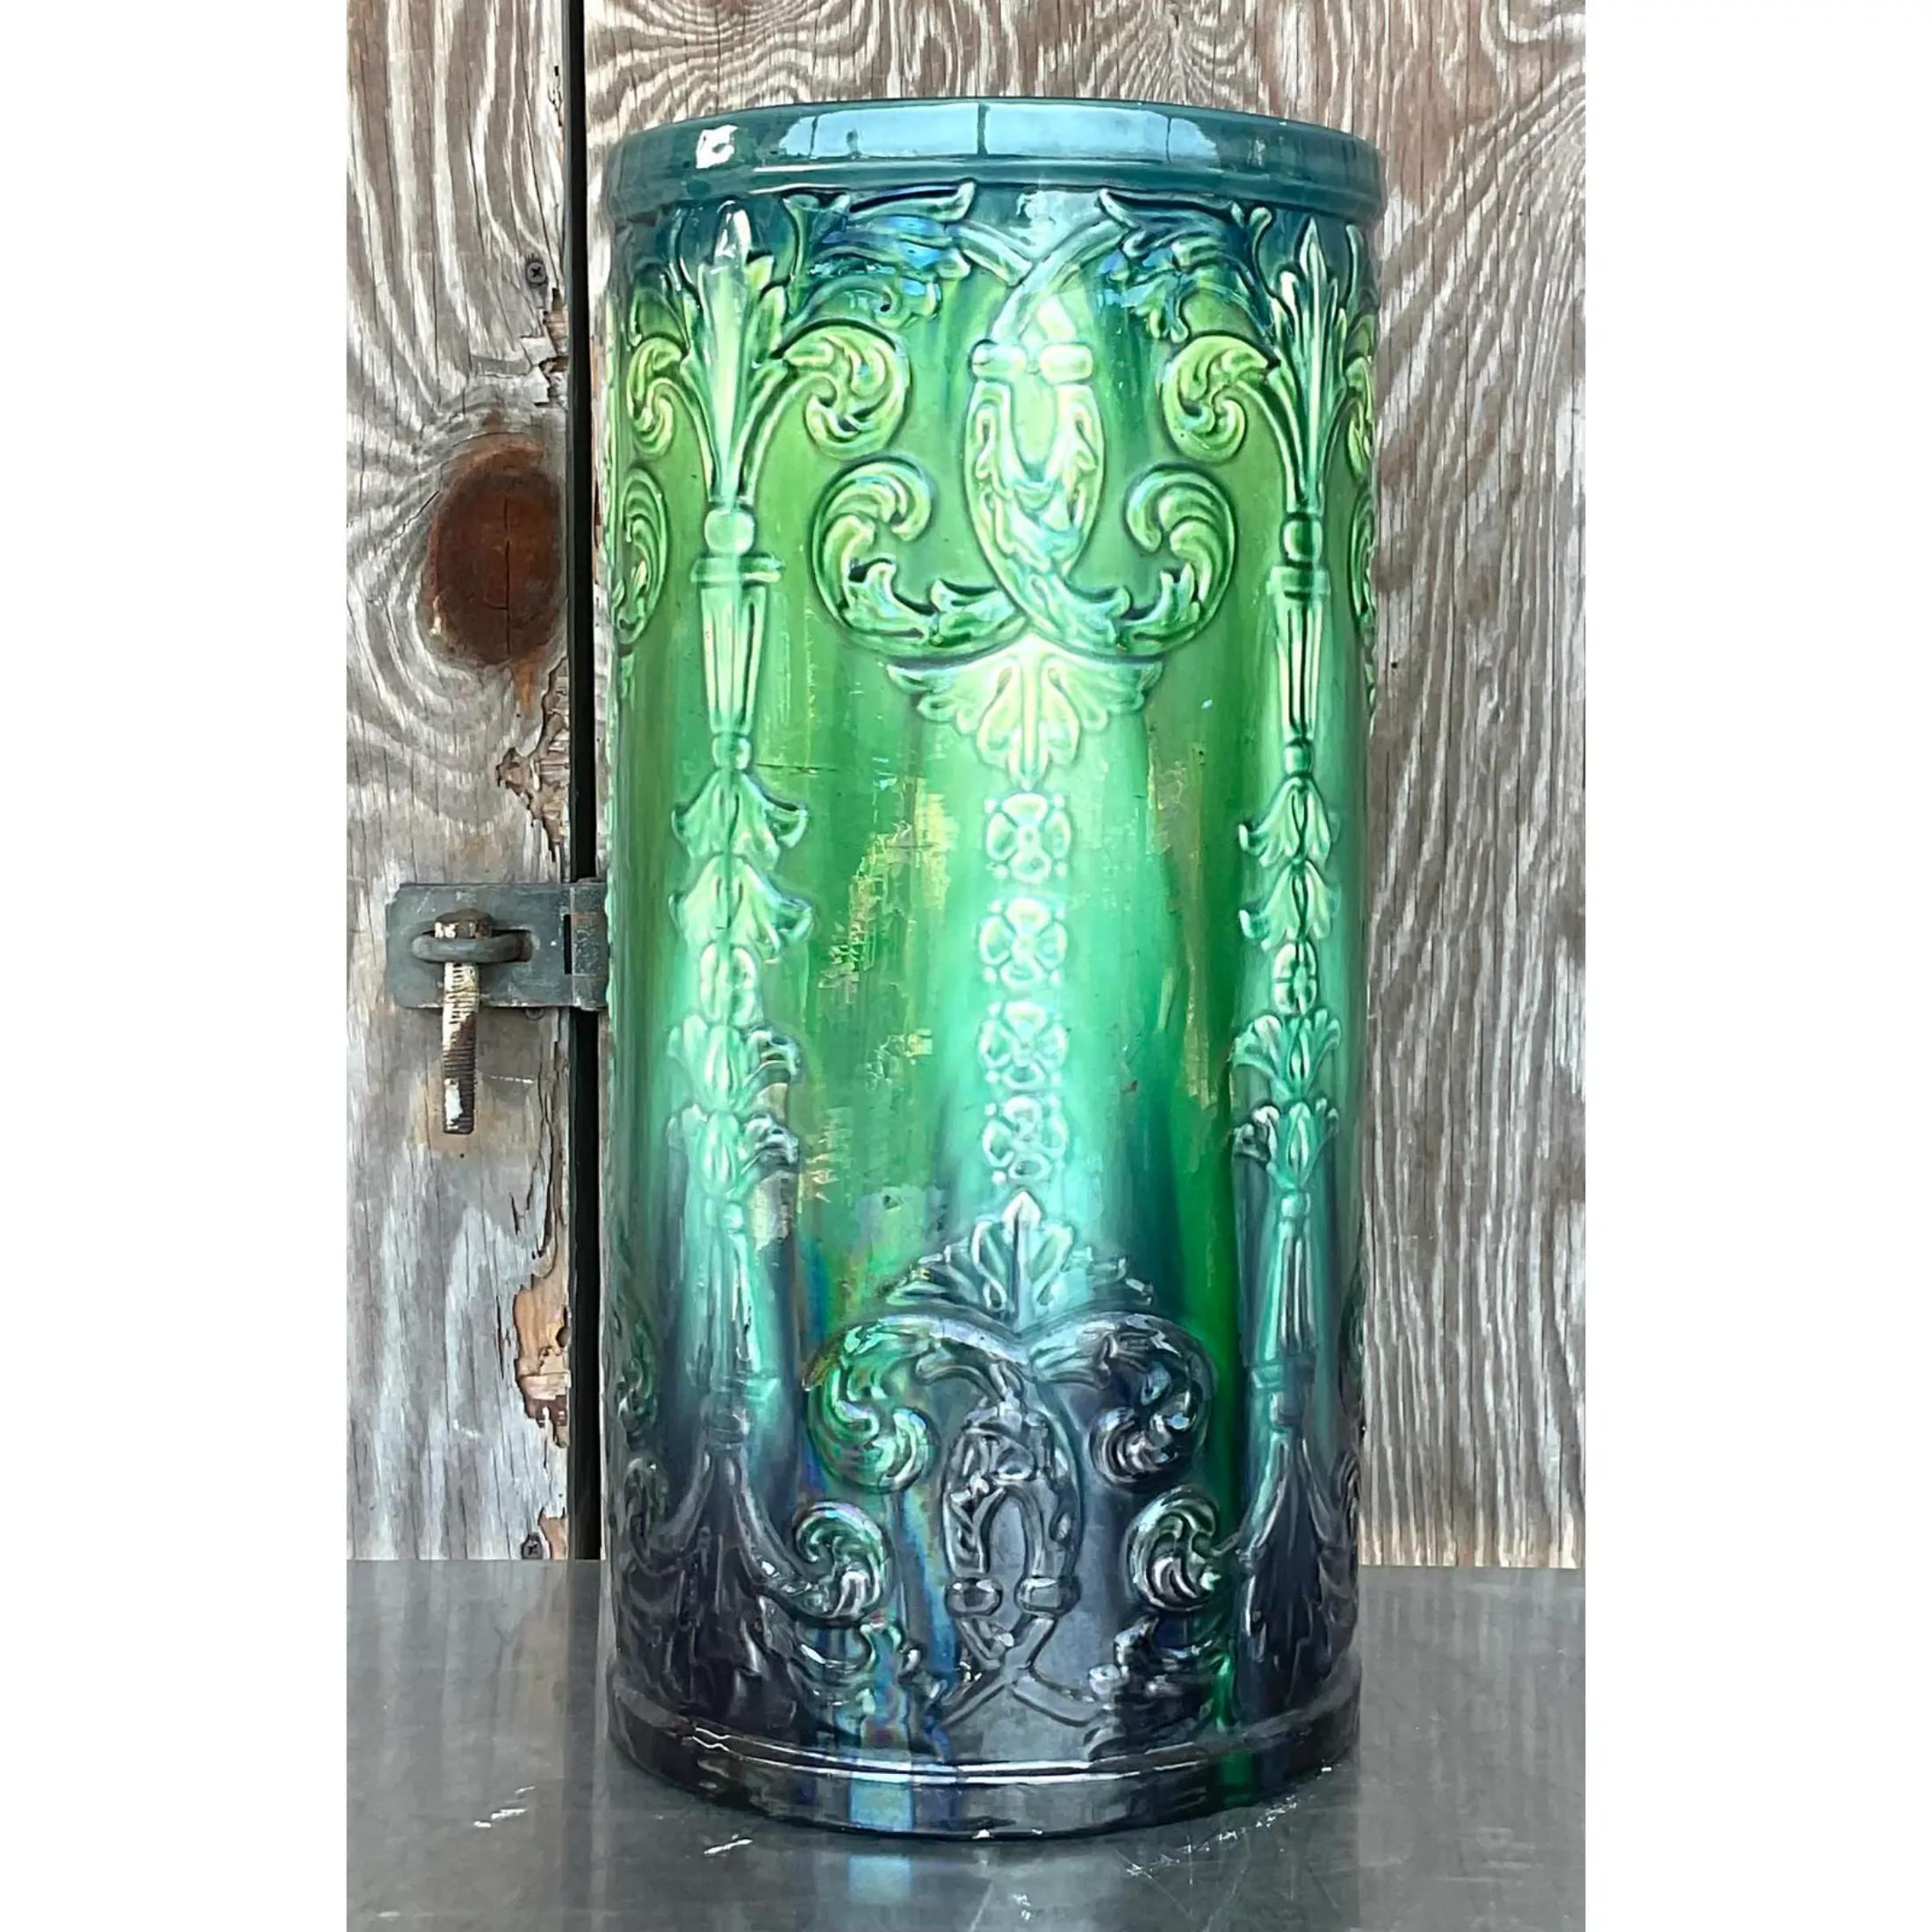 A fantastic vintage umbrella stand in multiple shades of greens with elaborate engravings. Acquired in a Palm Beach estate.